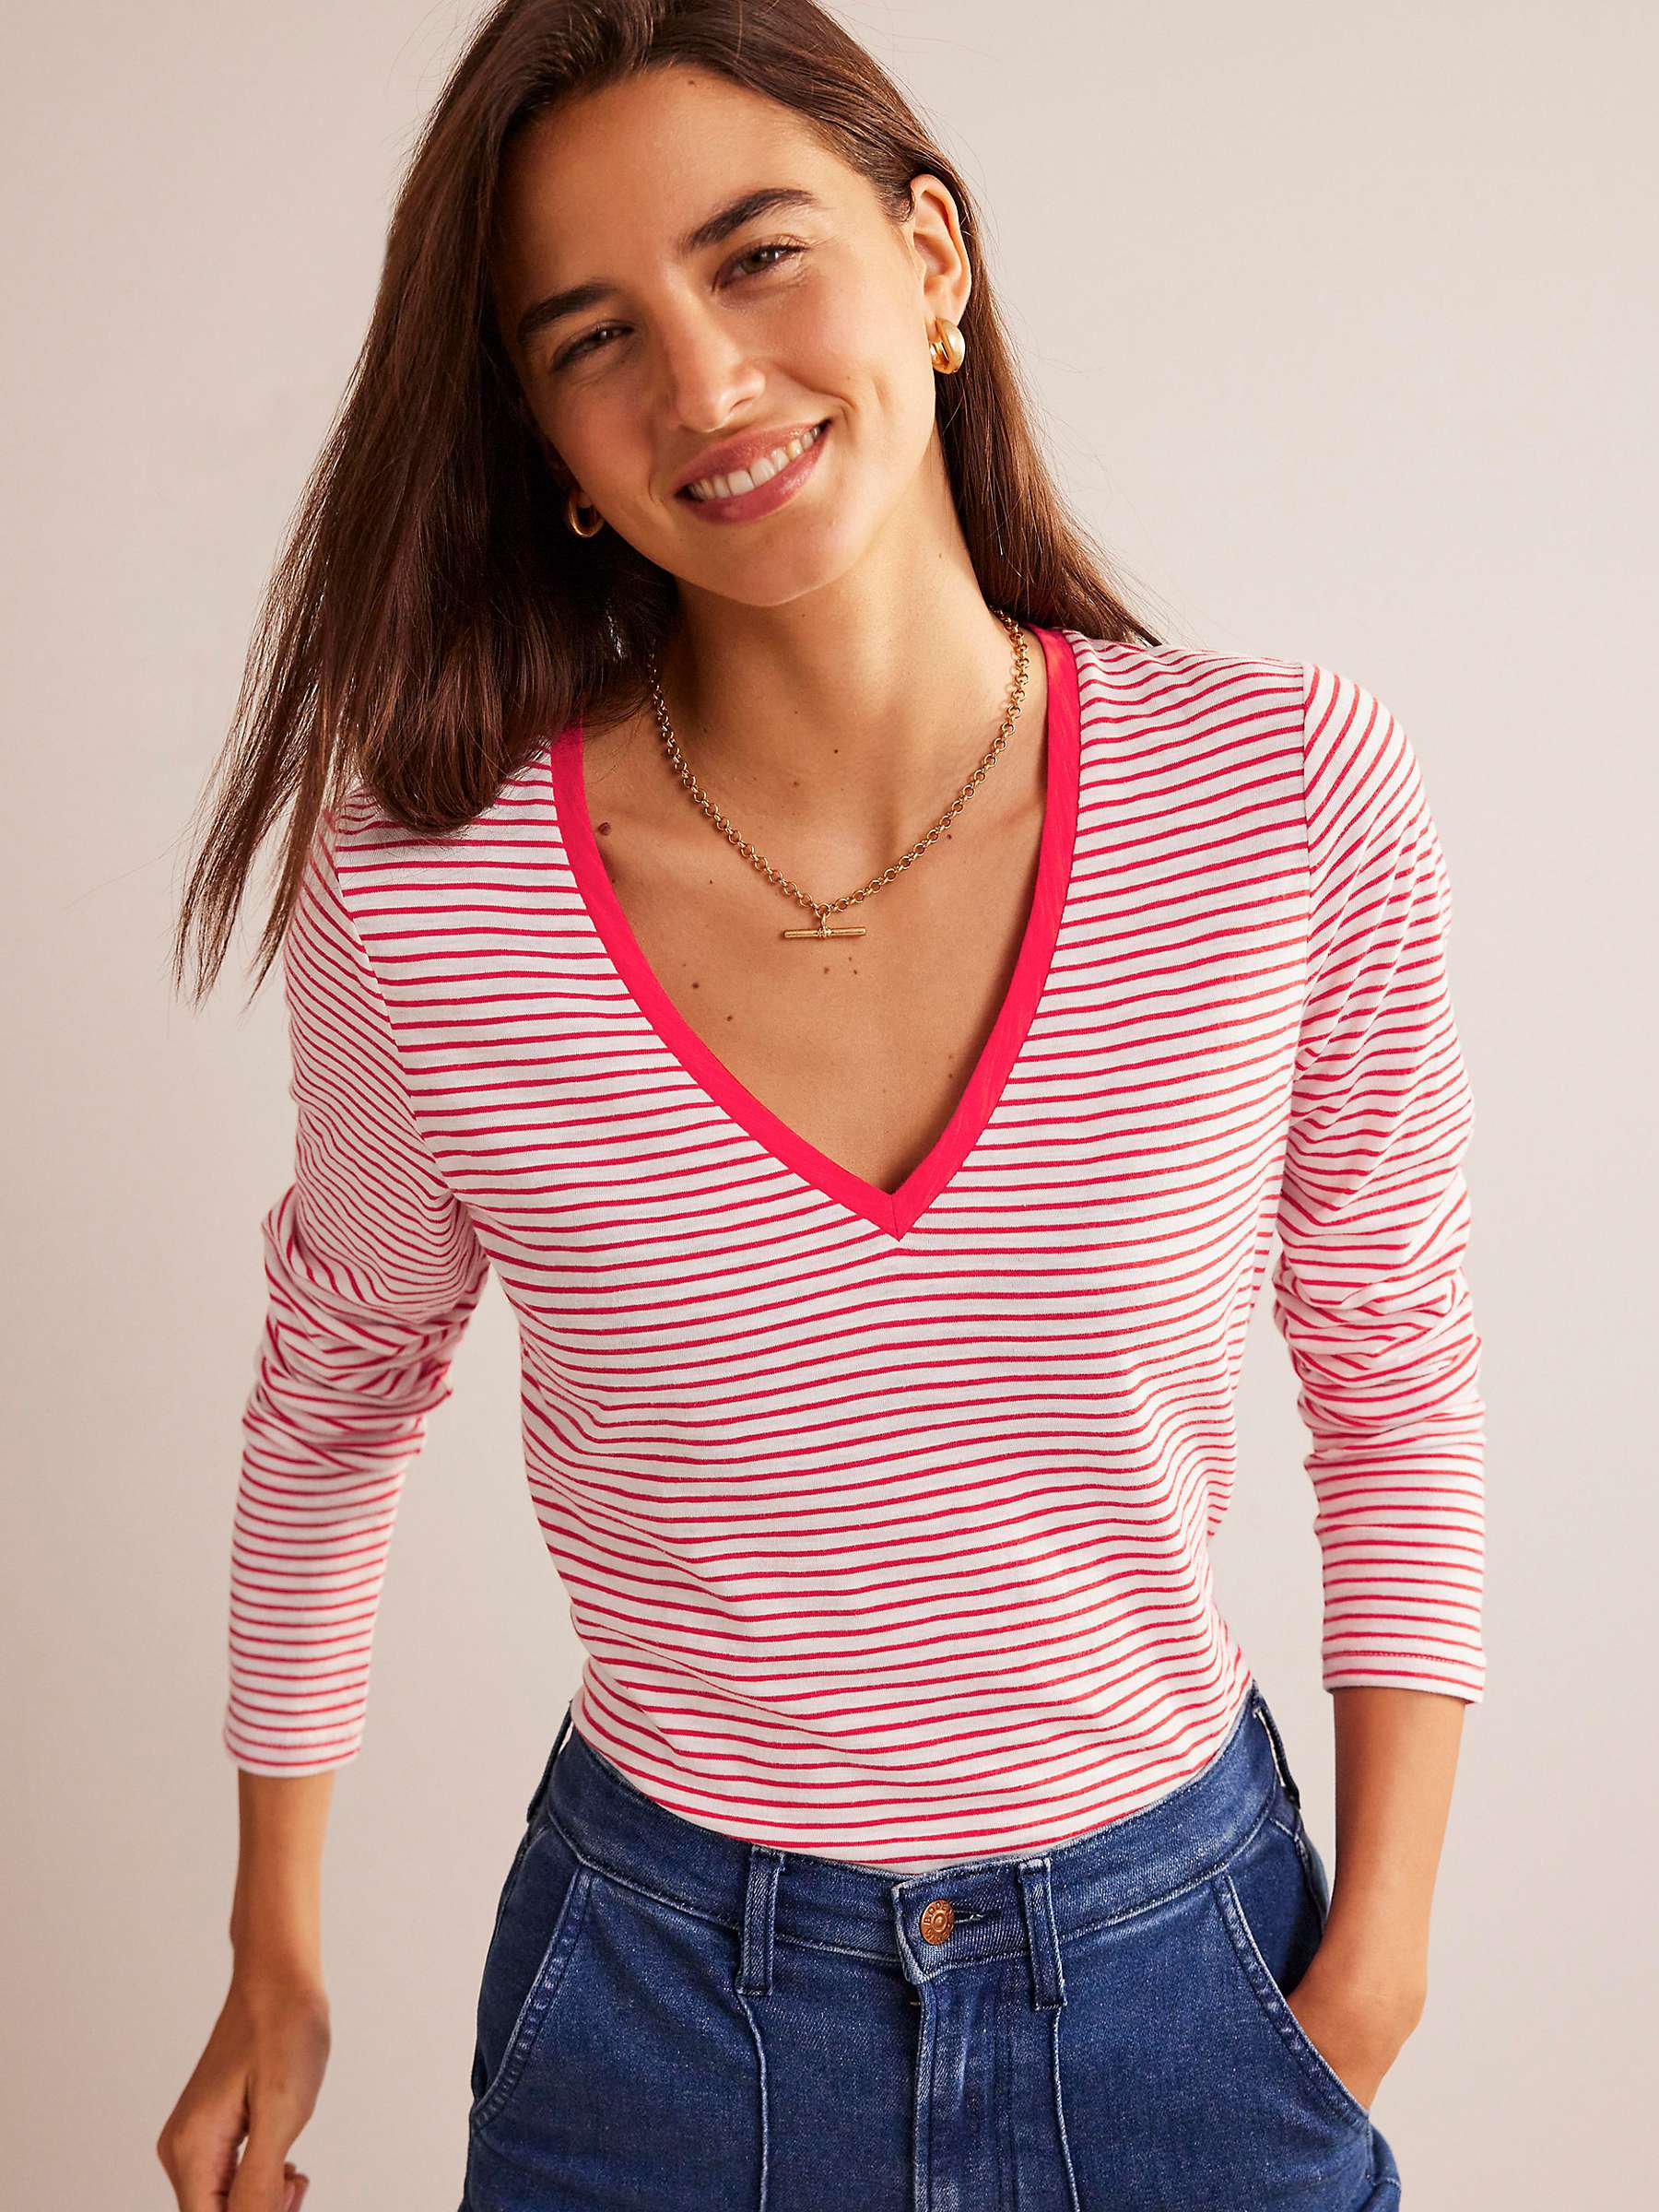 Boden Long Sleeve Stripe Cotton T-Shirt, Red/Ivory at John Lewis & Partners